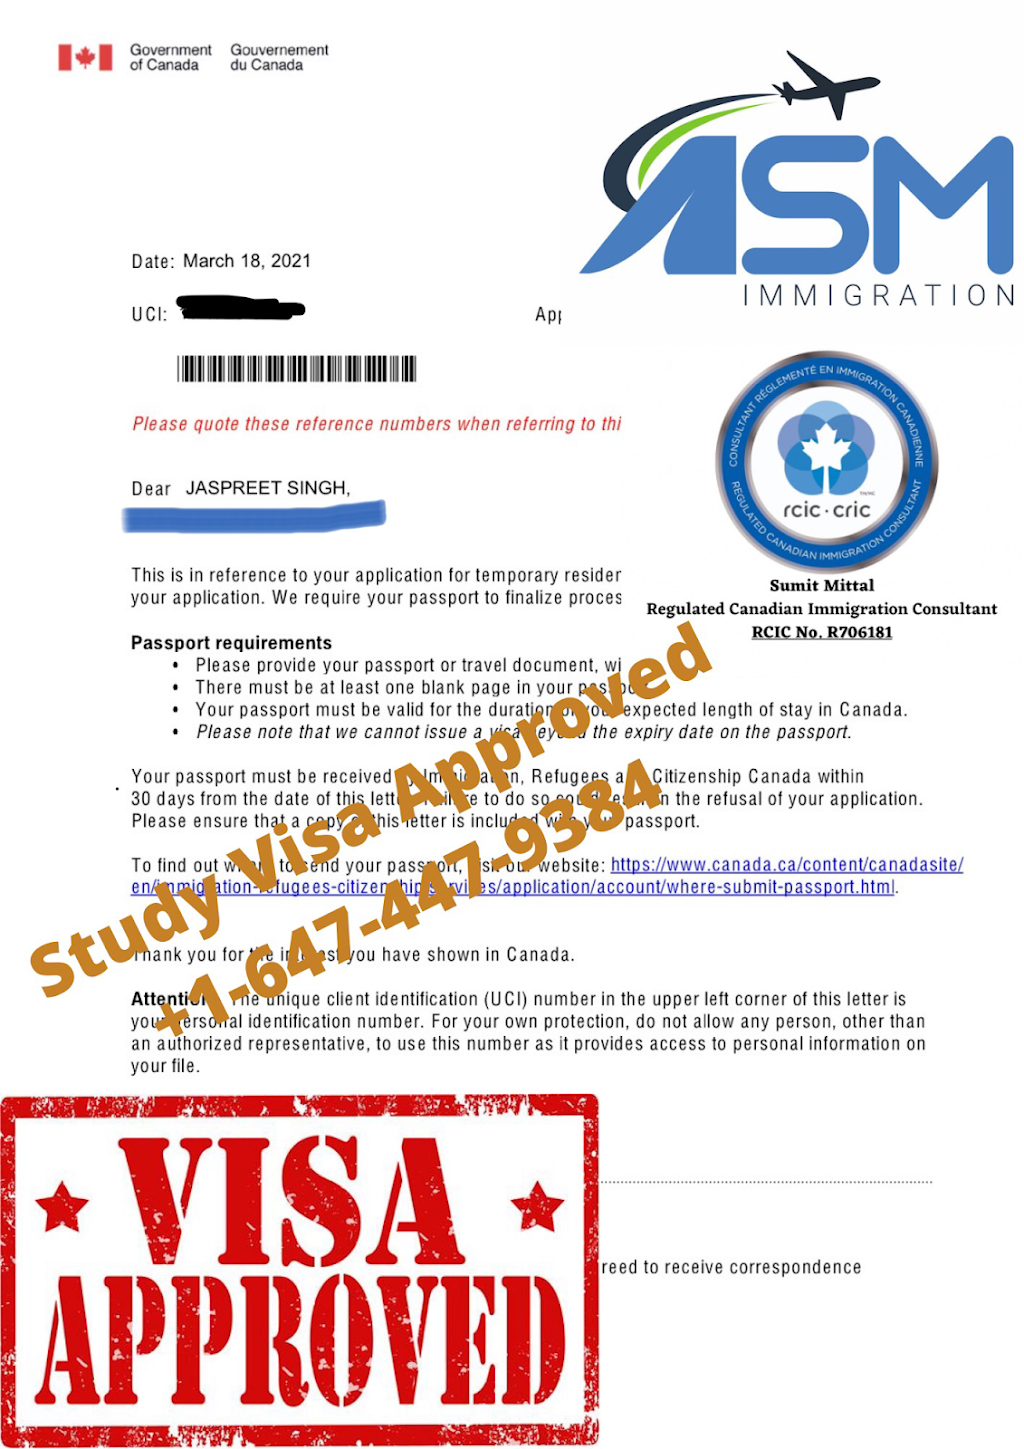 ASM Immigration Services | 318 Painted Post Dr A, Scarborough, ON M1G 2M3, Canada | Phone: (647) 447-9384